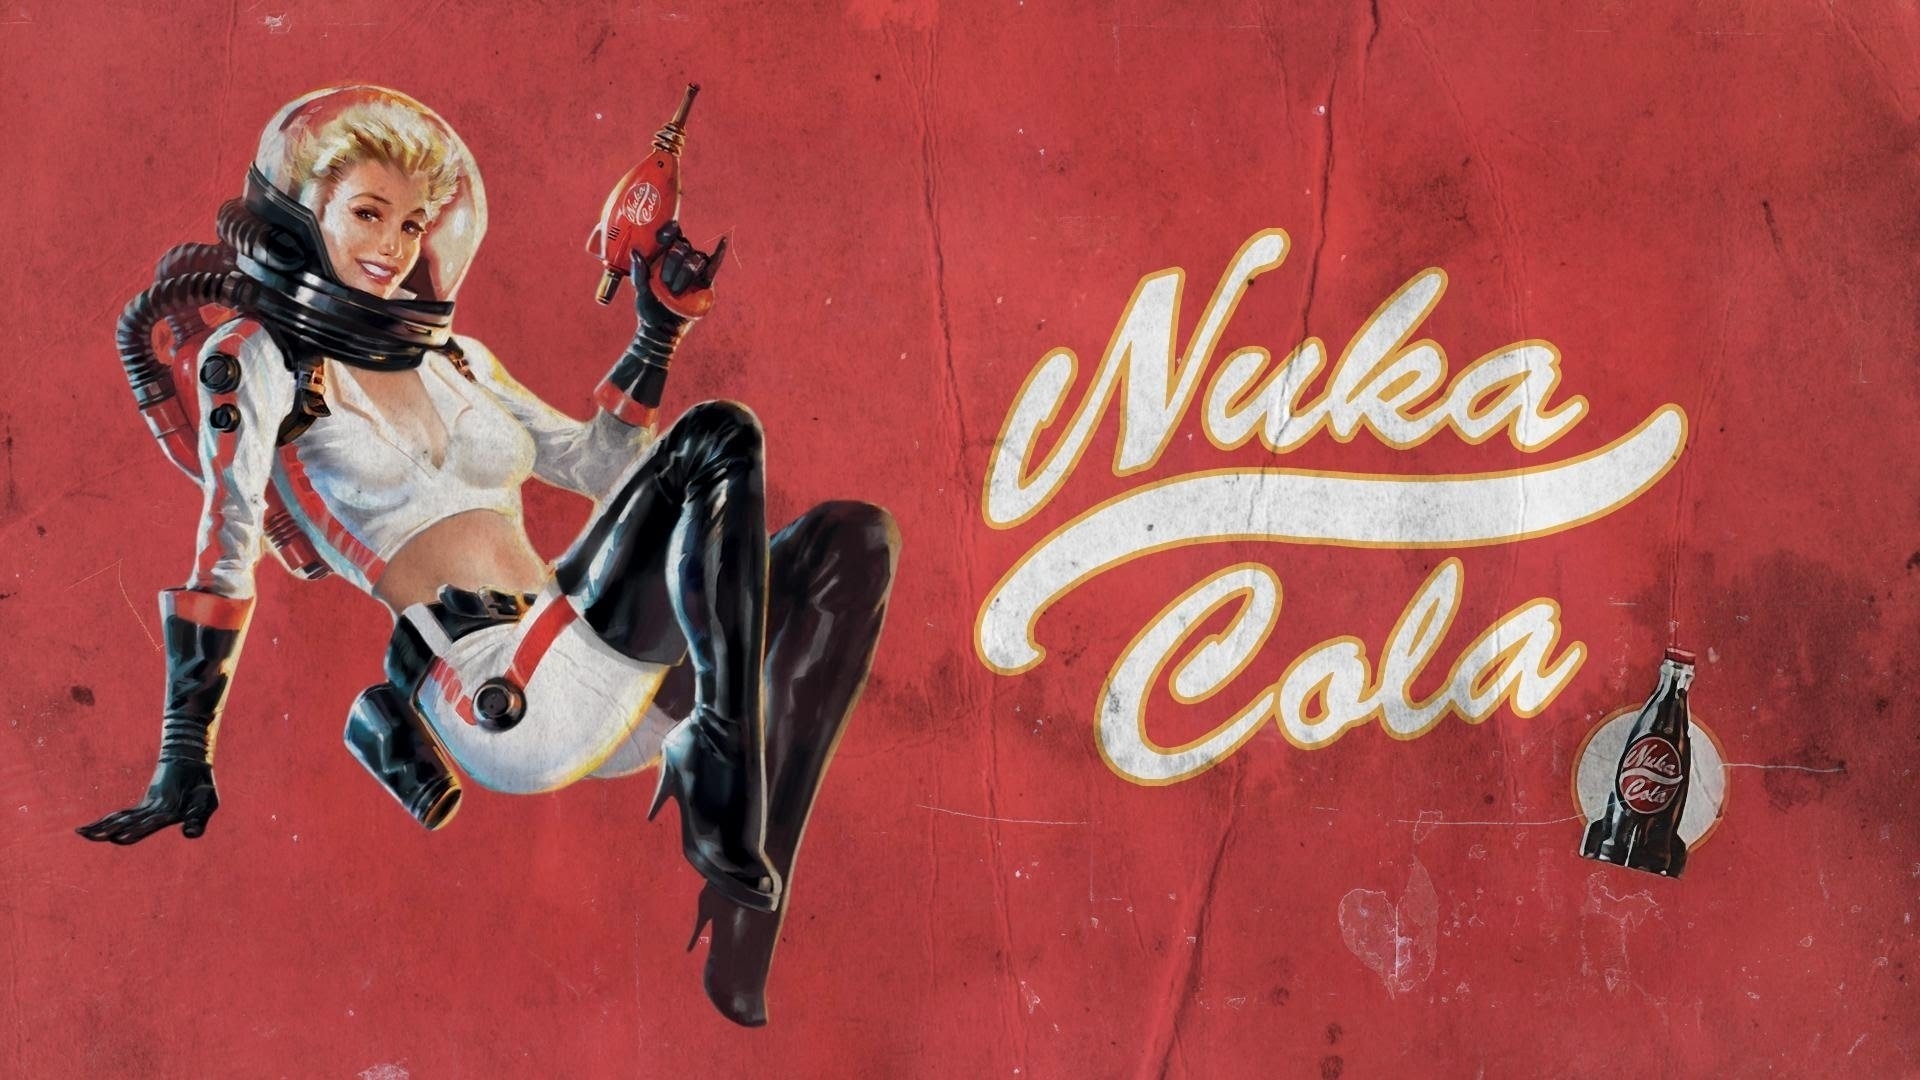 10 Top Fallout Nuka Cola Wallpaper FULL HD 1920×1080 For PC Background